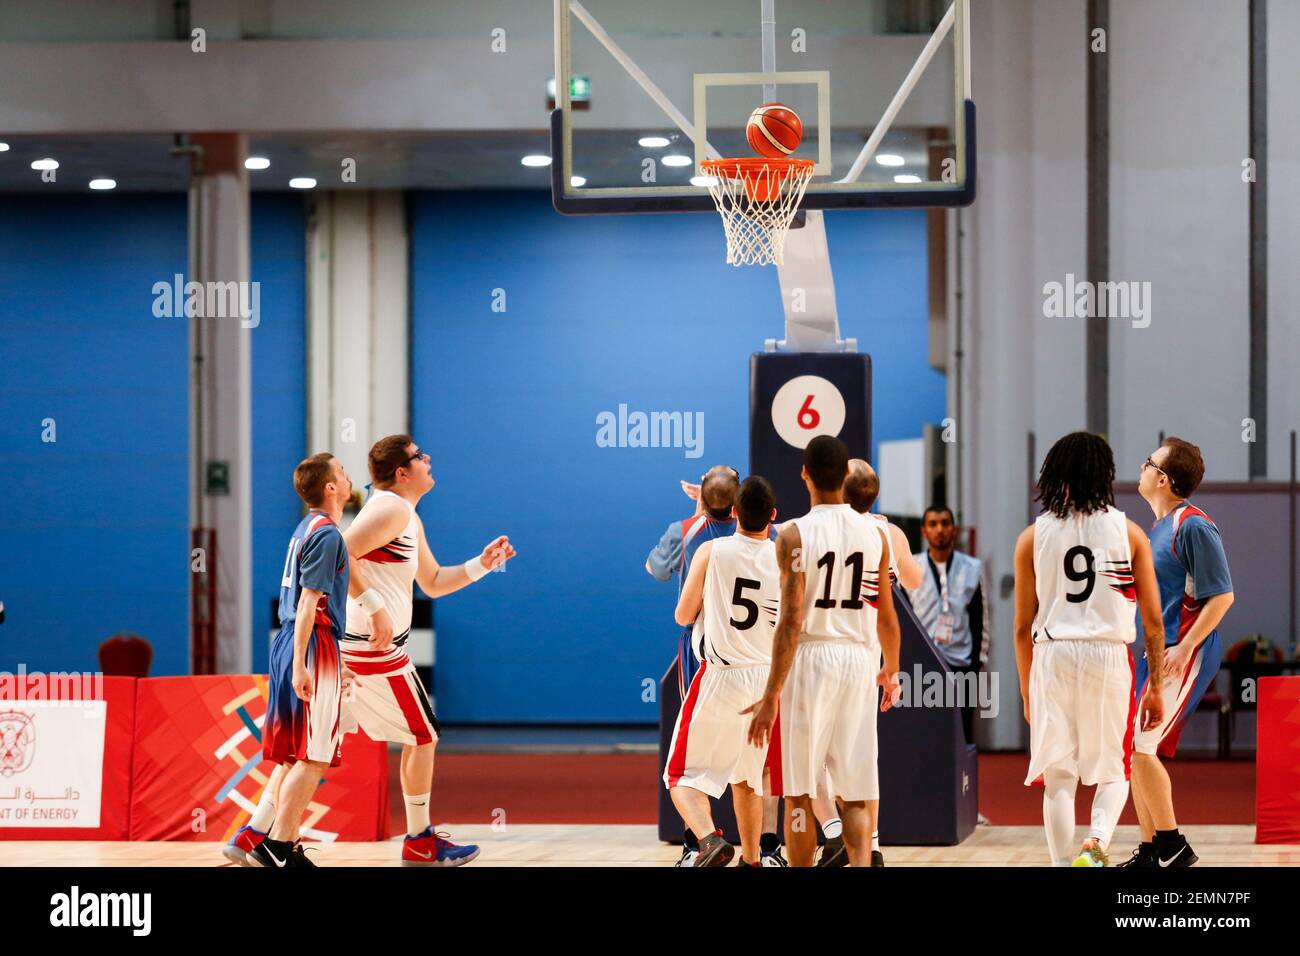 USA basketball team fights Great Britain during Special Olympics World  Games in Abu Dhabi National Exhibition Centre, United Arab Emirates on  March 20, 2019. Special Olympics is a sporting competition for people